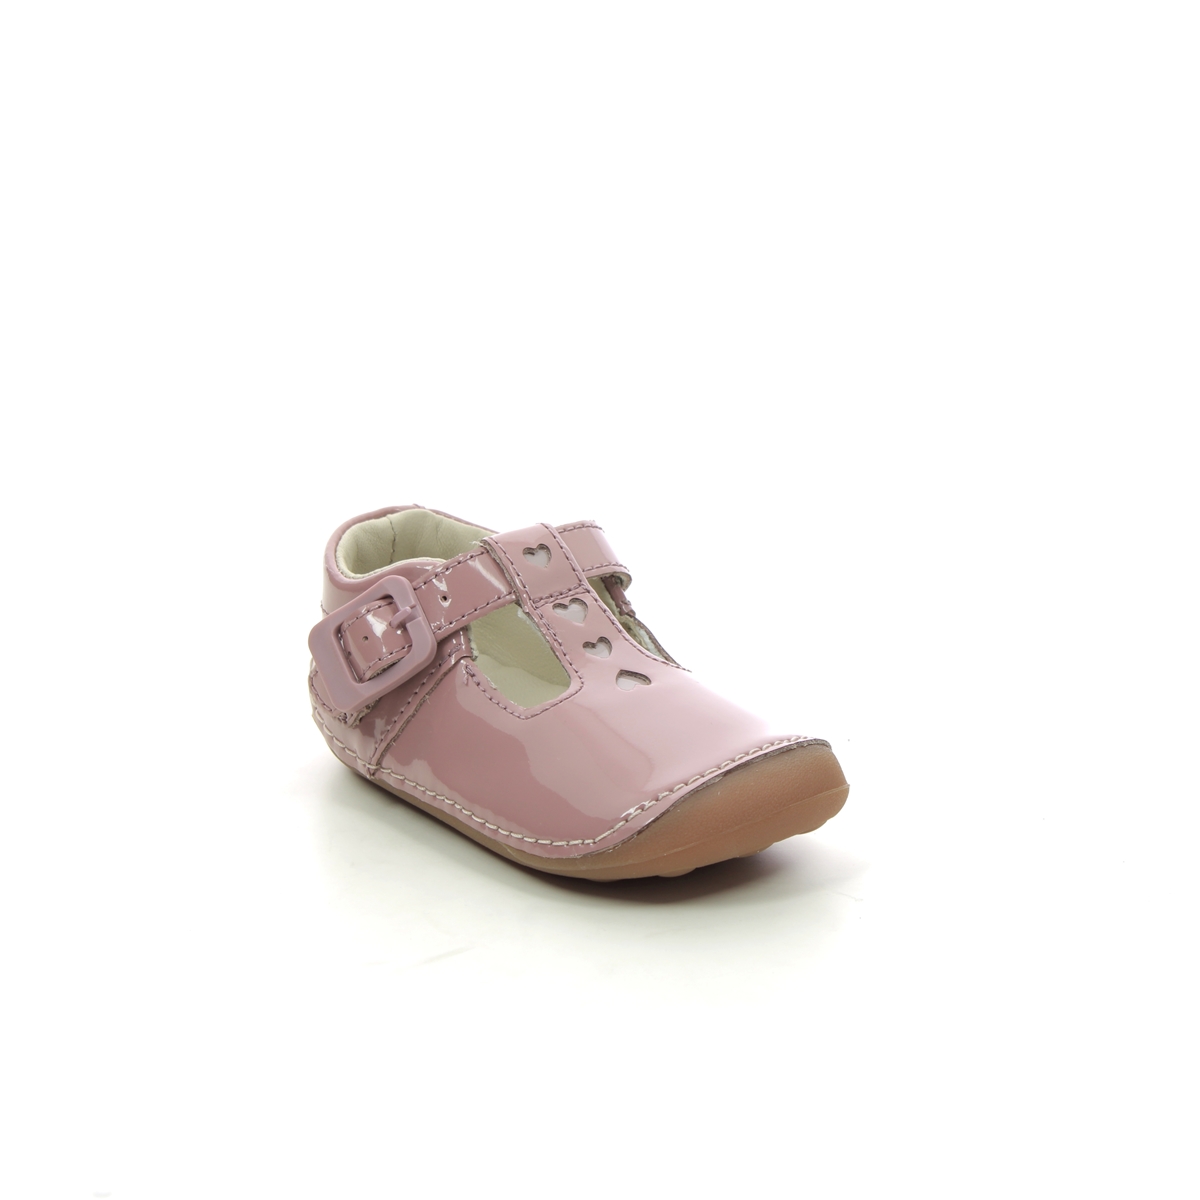 Clarks Tiny Beat T Pink Kids Girls First And Baby Shoes 694087G In Size 2.5 In Plain Pink G Width Fitting For kids